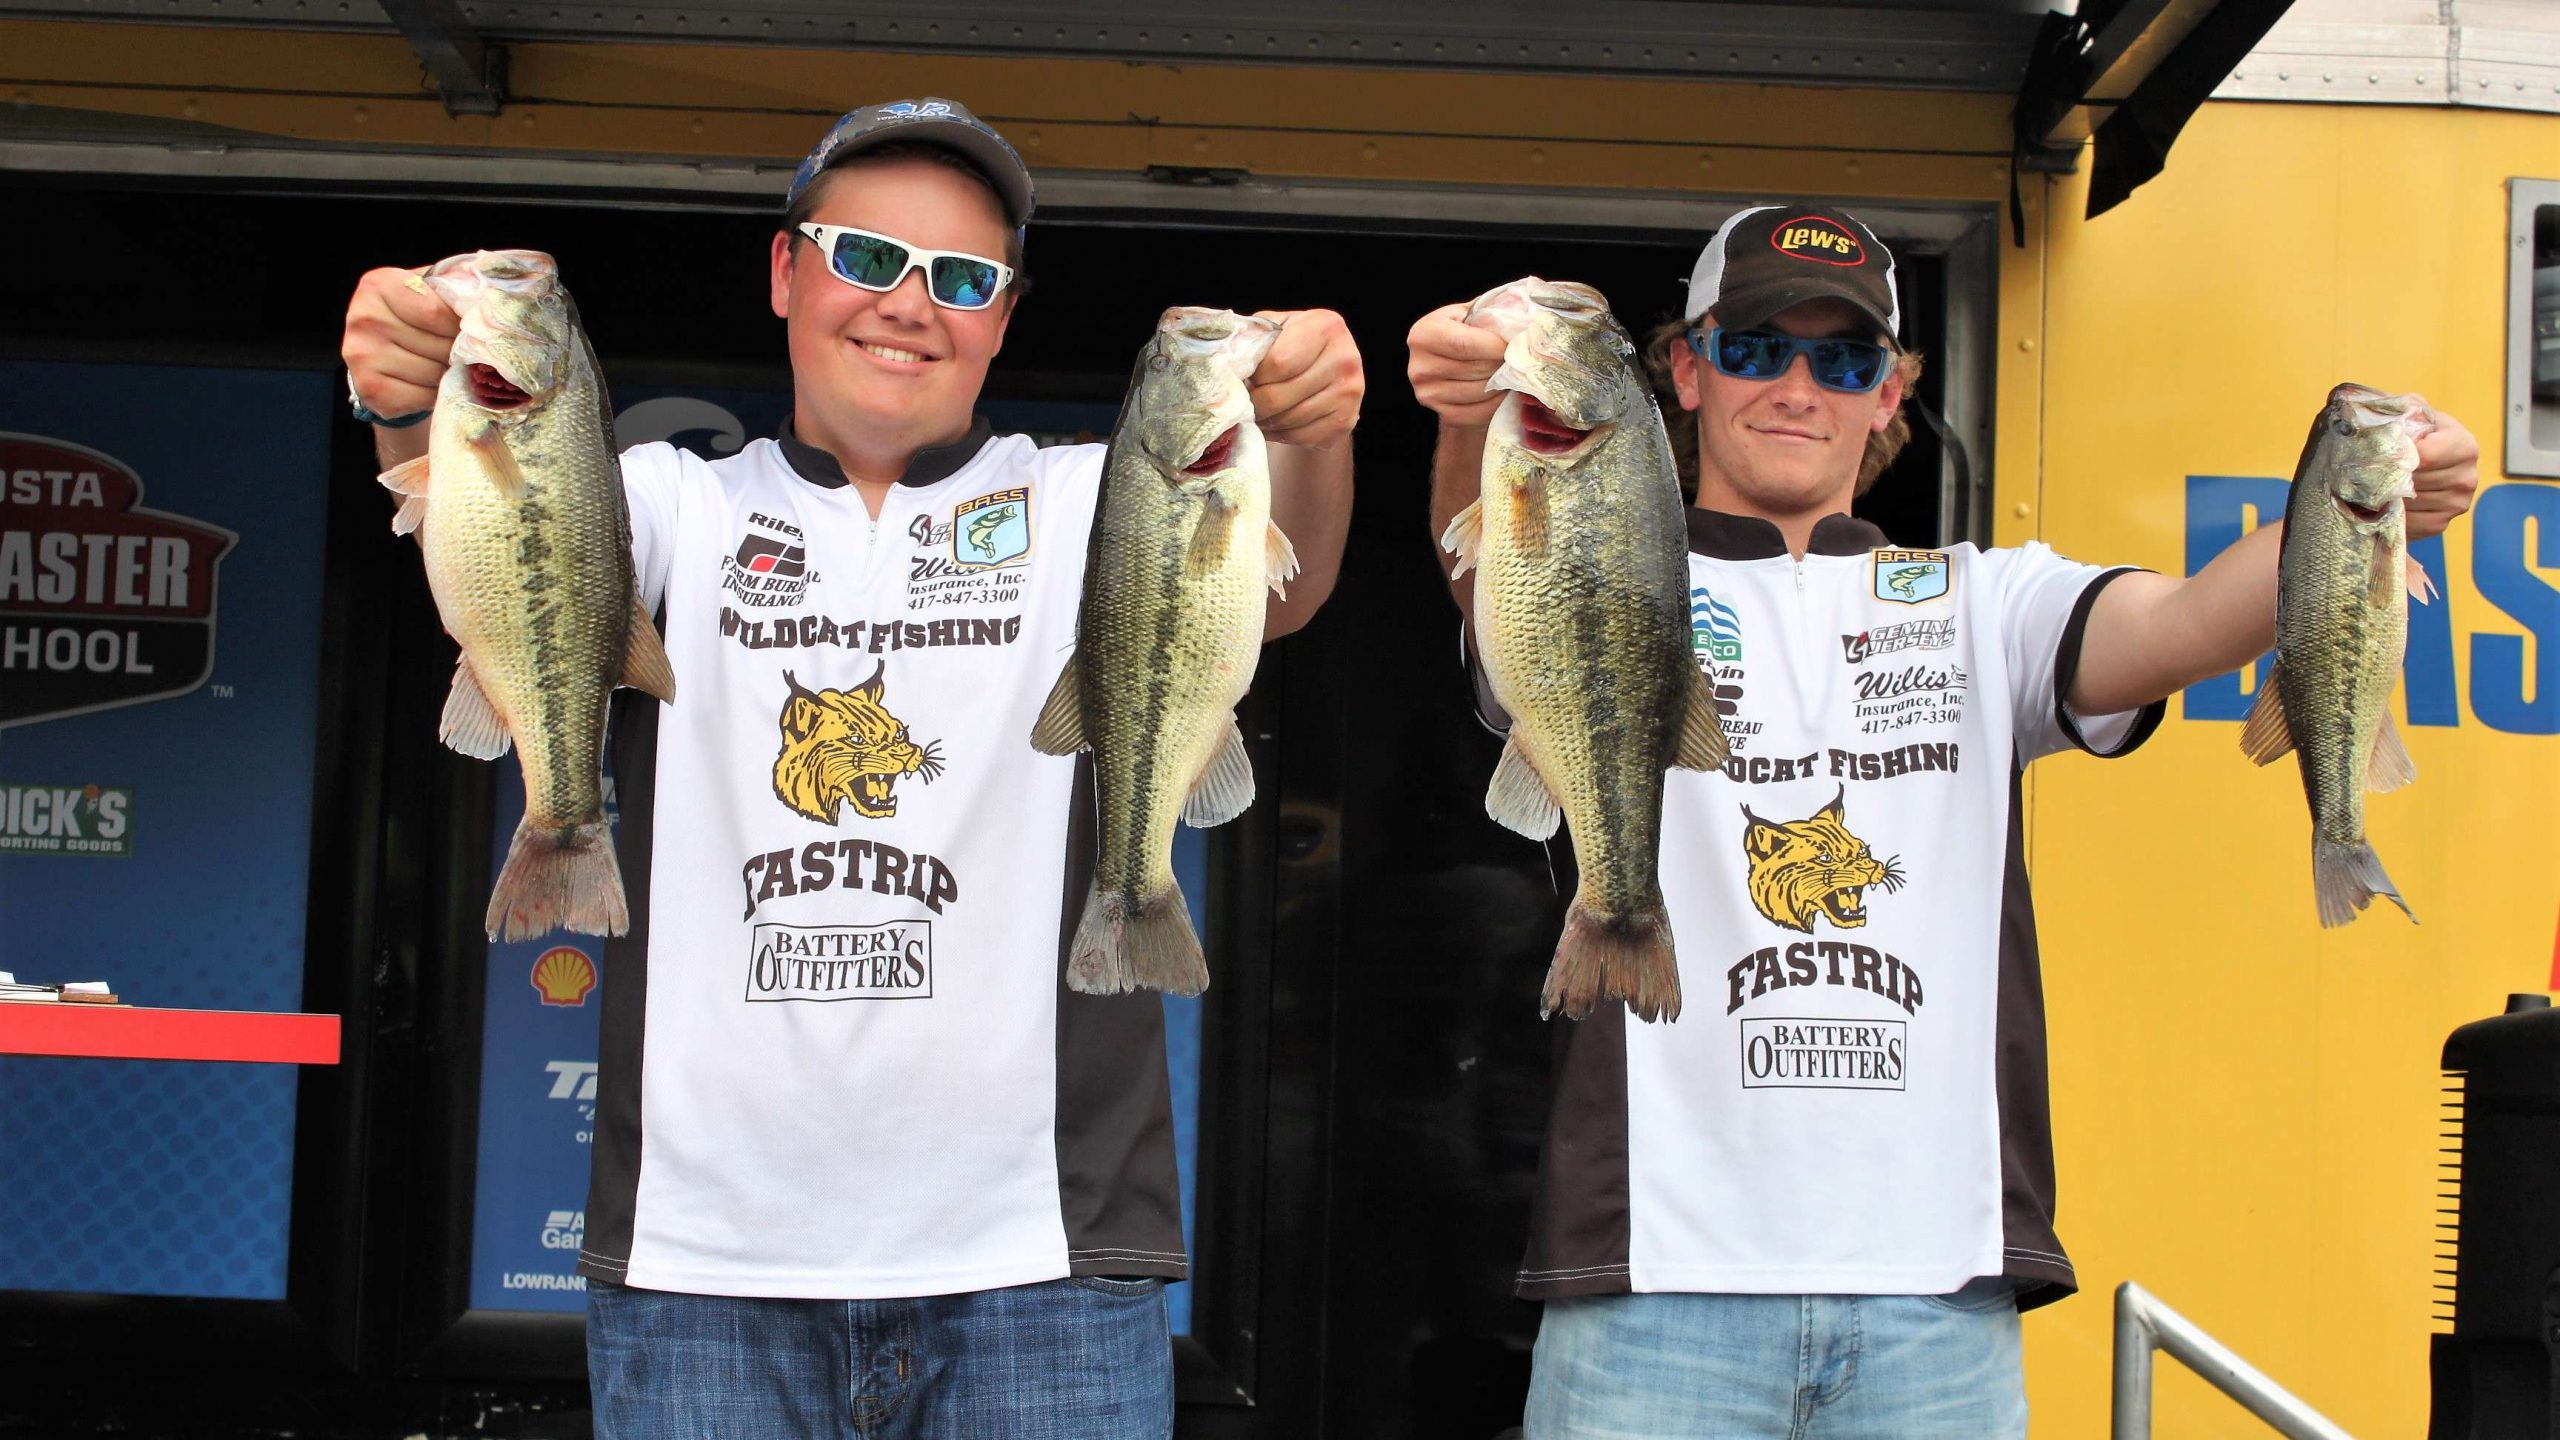 And there's Fletcher and White with four fine bass. They finished fifth overall with 13-13.